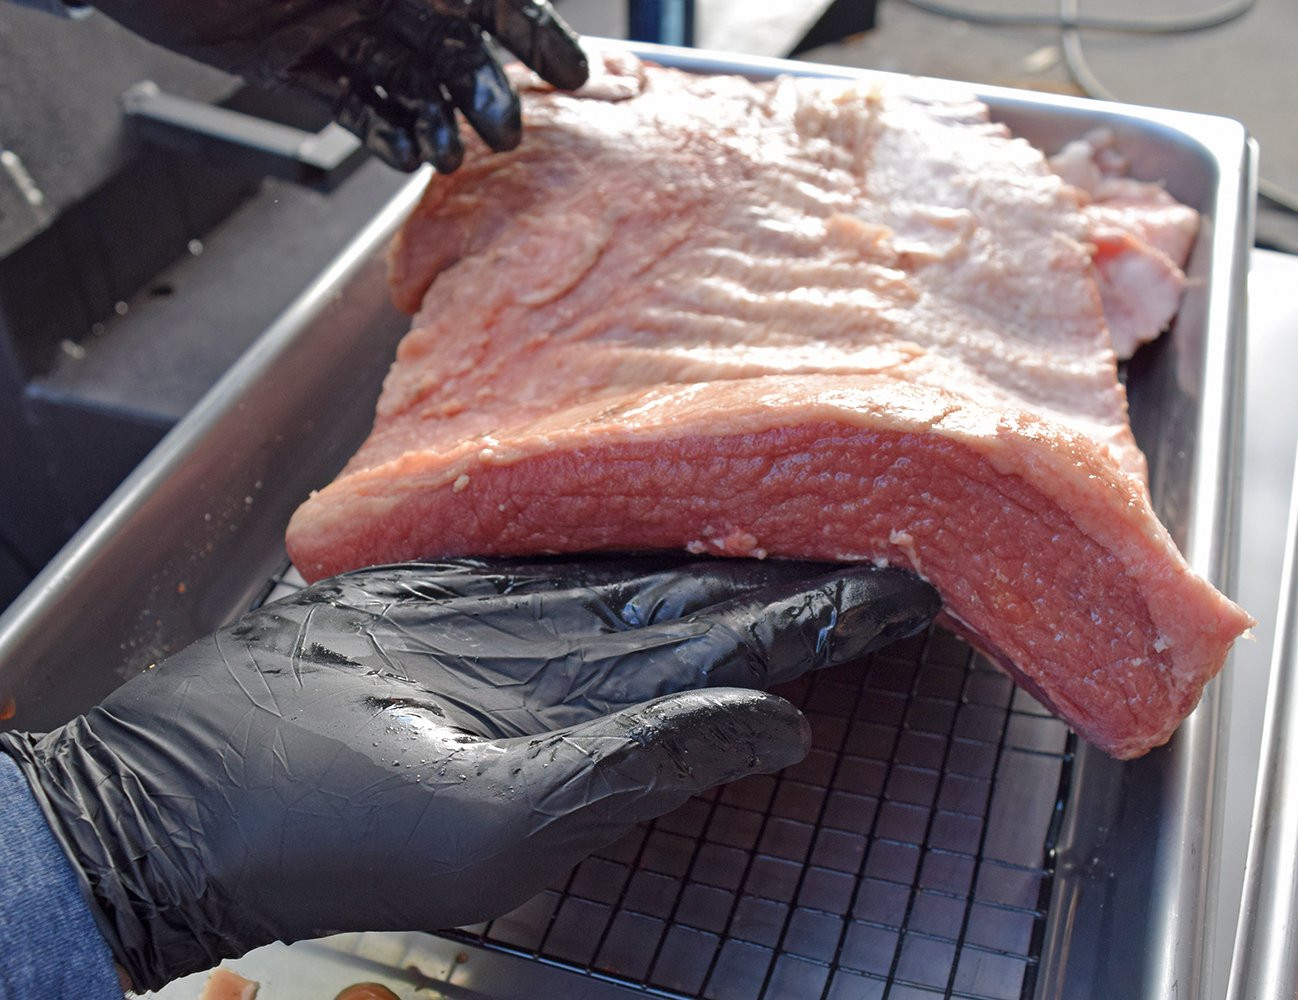 Smoking Beef Brisket In Electric Smoker
 How to Smoke a Brisket in an Electric Smoker